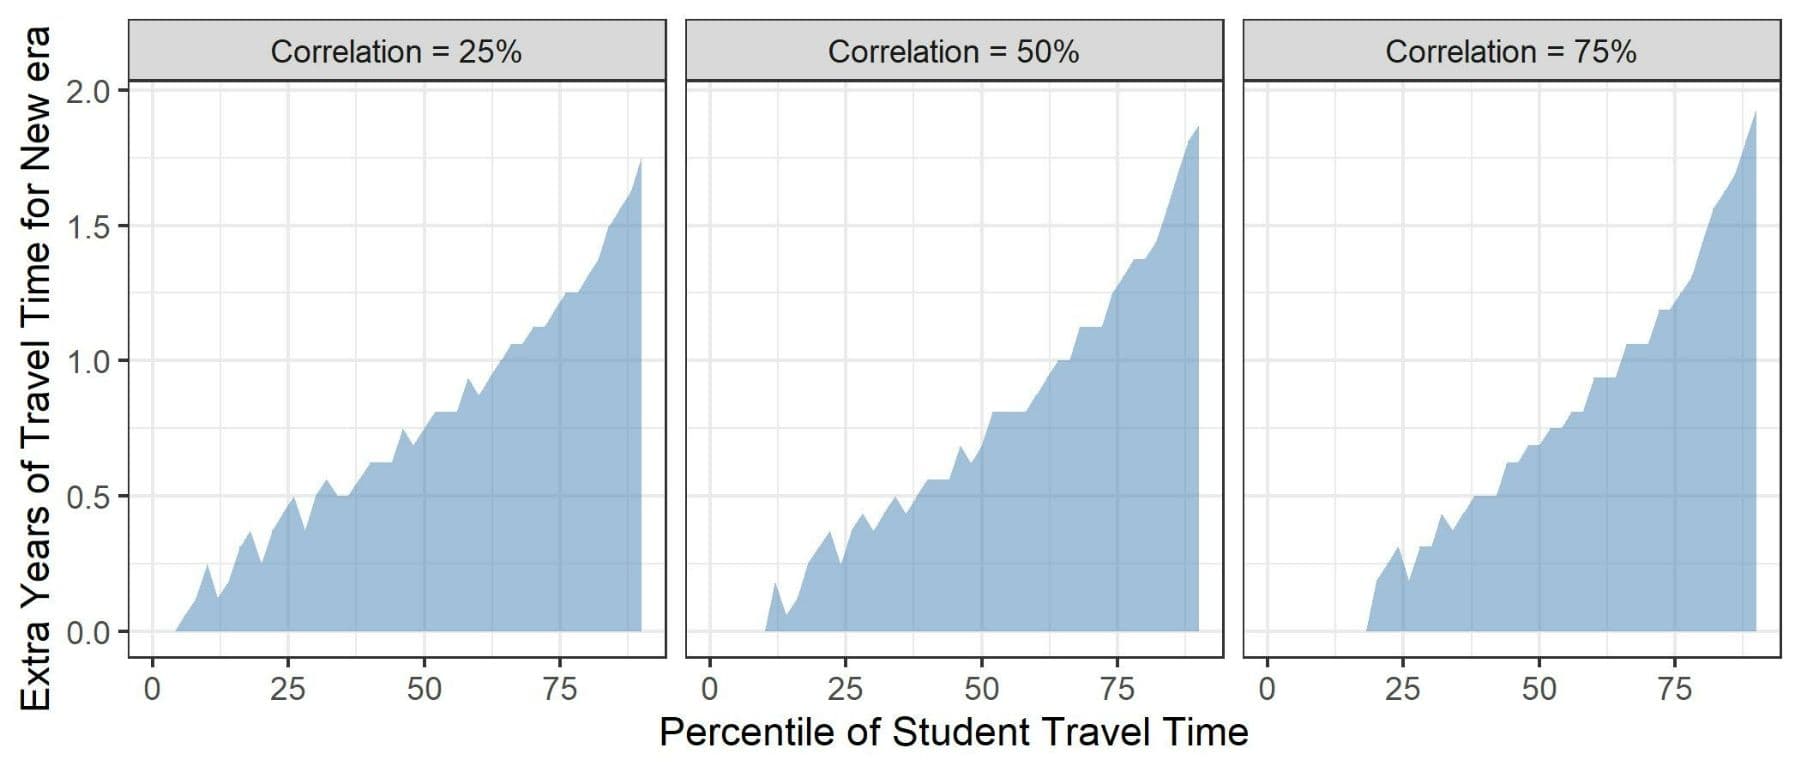 Theoretical increase in study time required in 'new' era compared to equivalent percentile of student in 'old' era